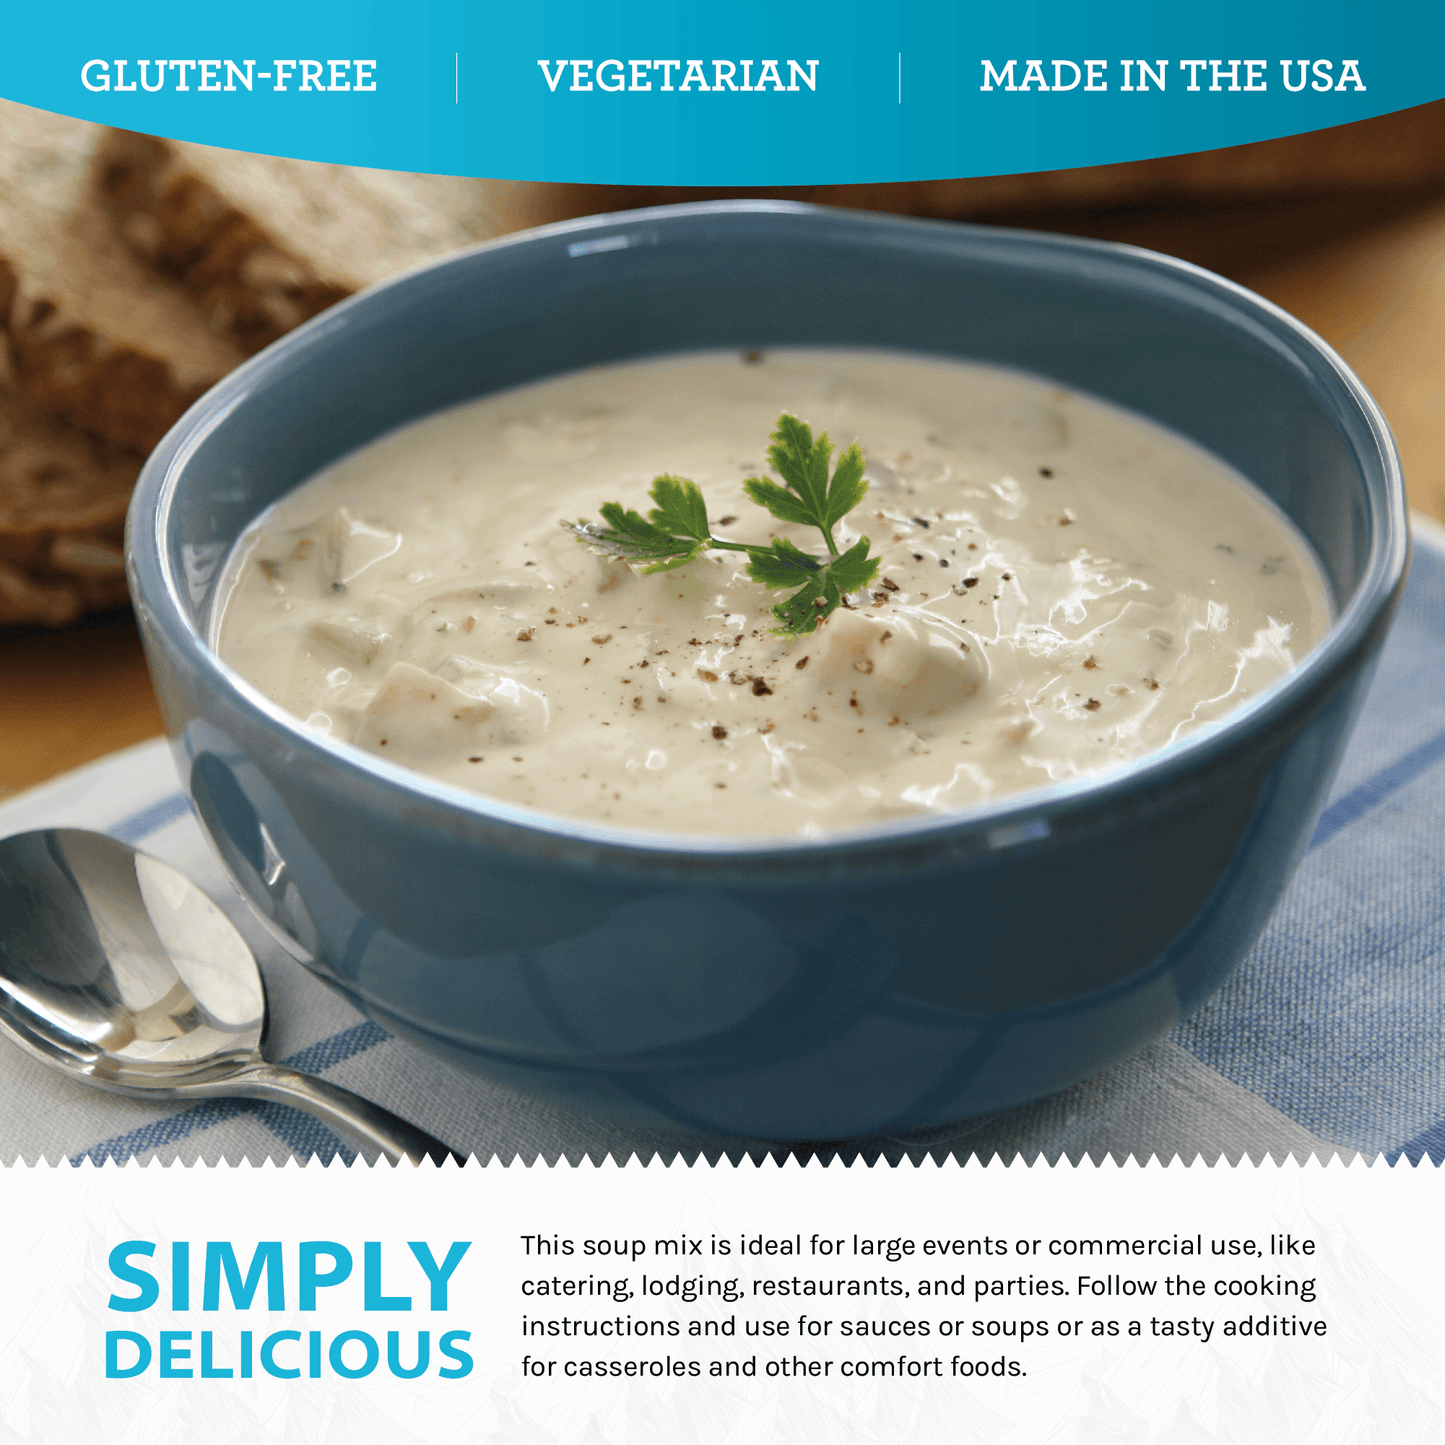 Clam Chowder Starter Soup Mix - 17 Servings per Pouch - Simple Kitchen Foods